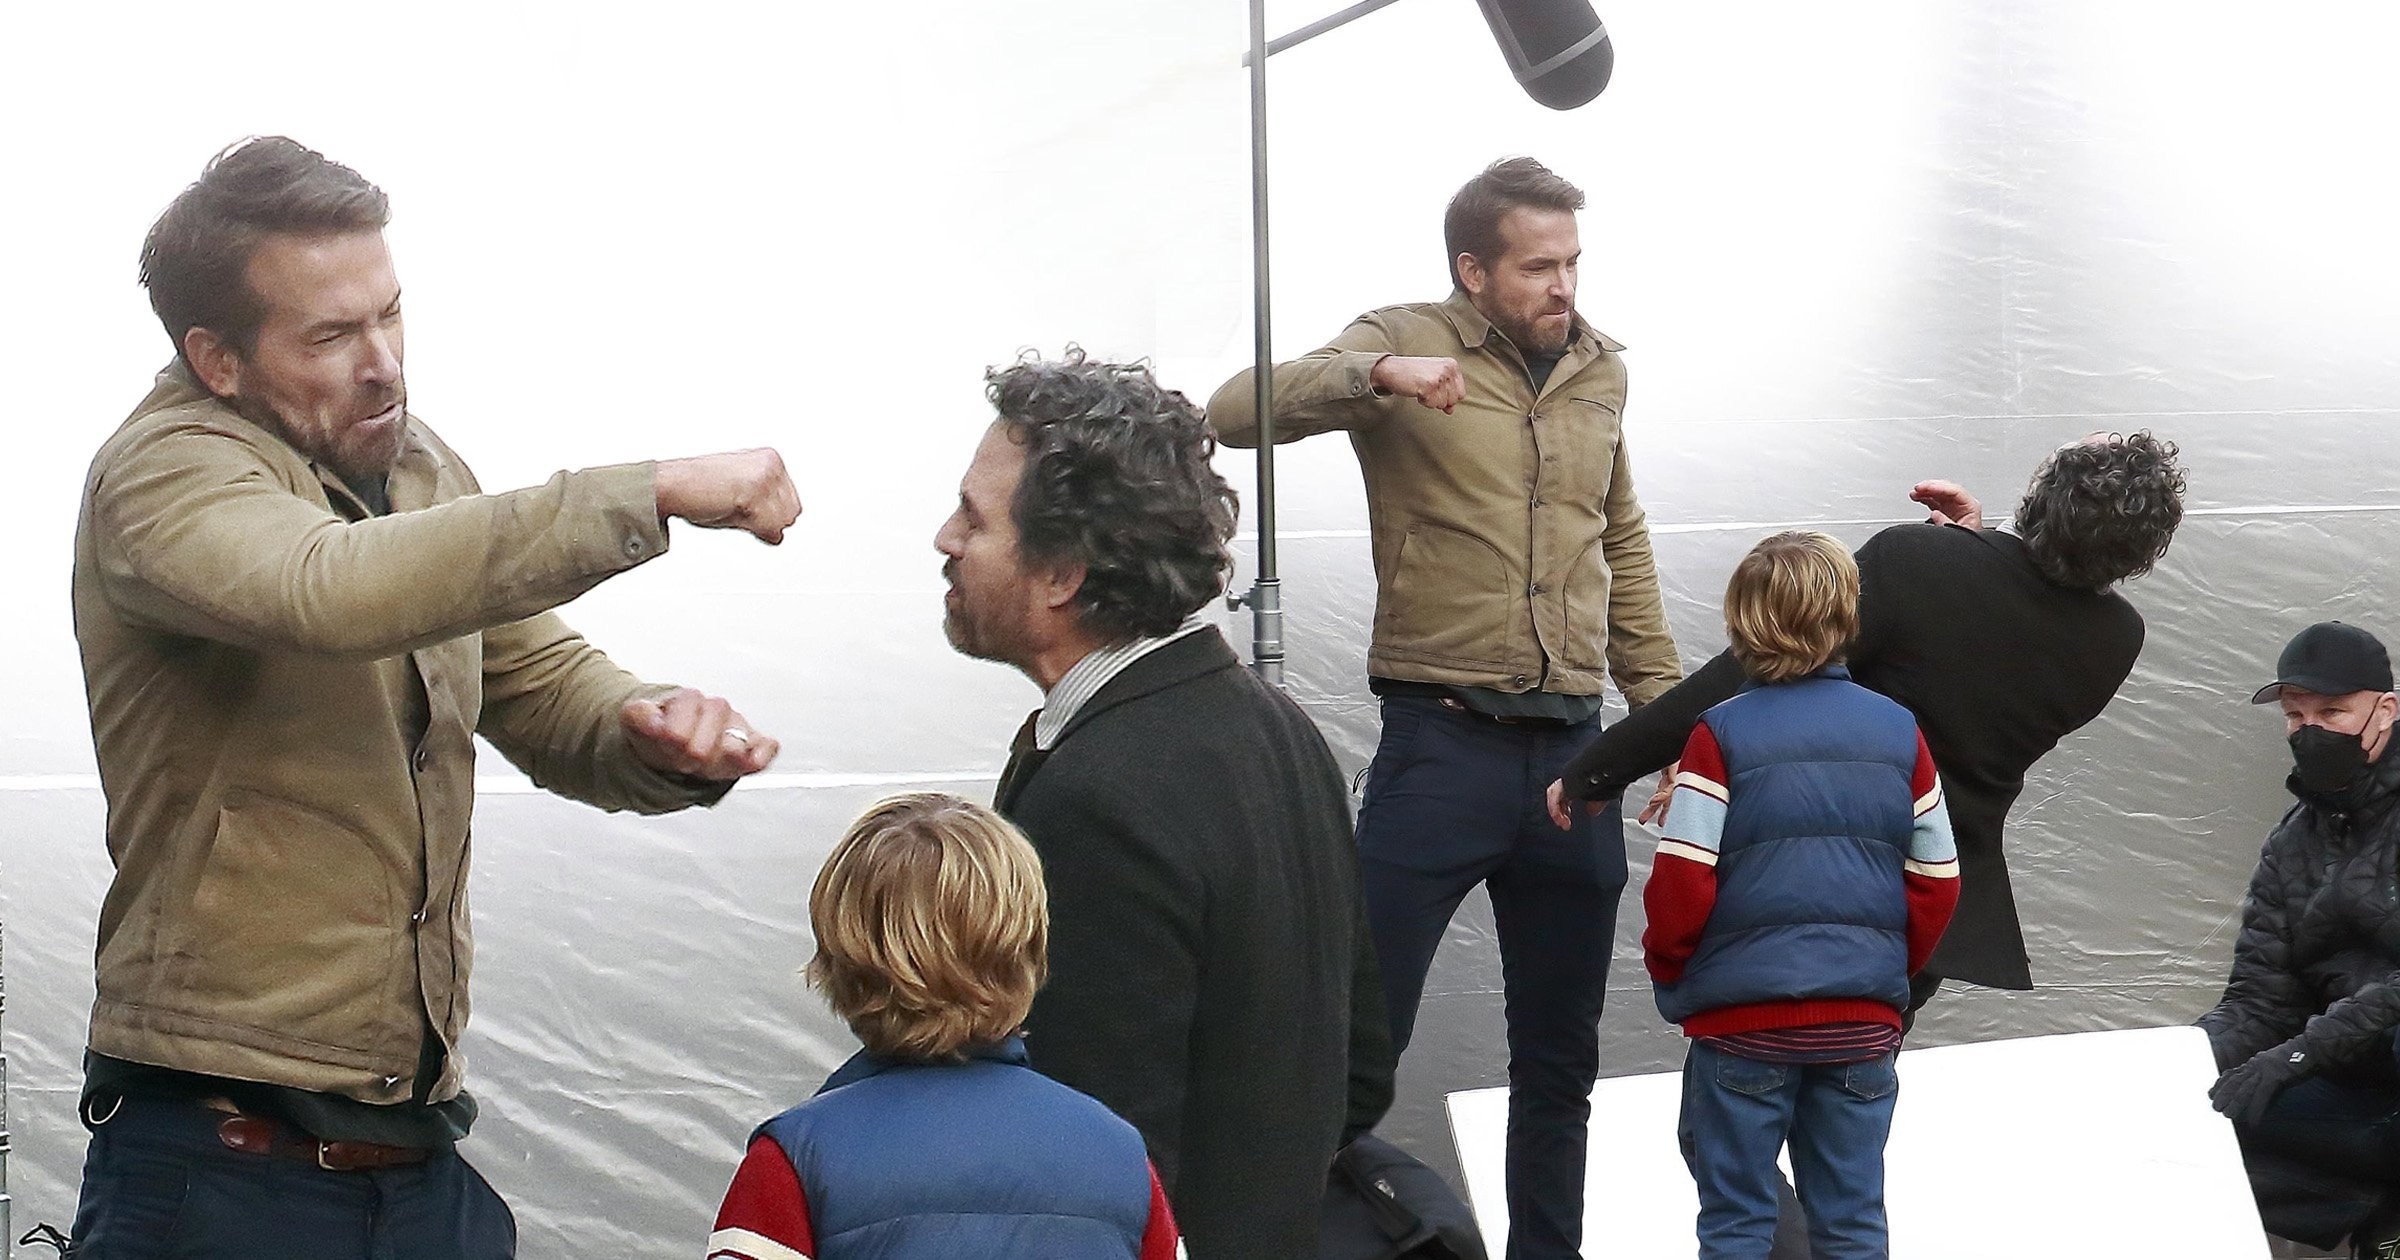 Ryan Reynolds punches Mark Ruffalo on set in scene for Netflix’s The Adam Project